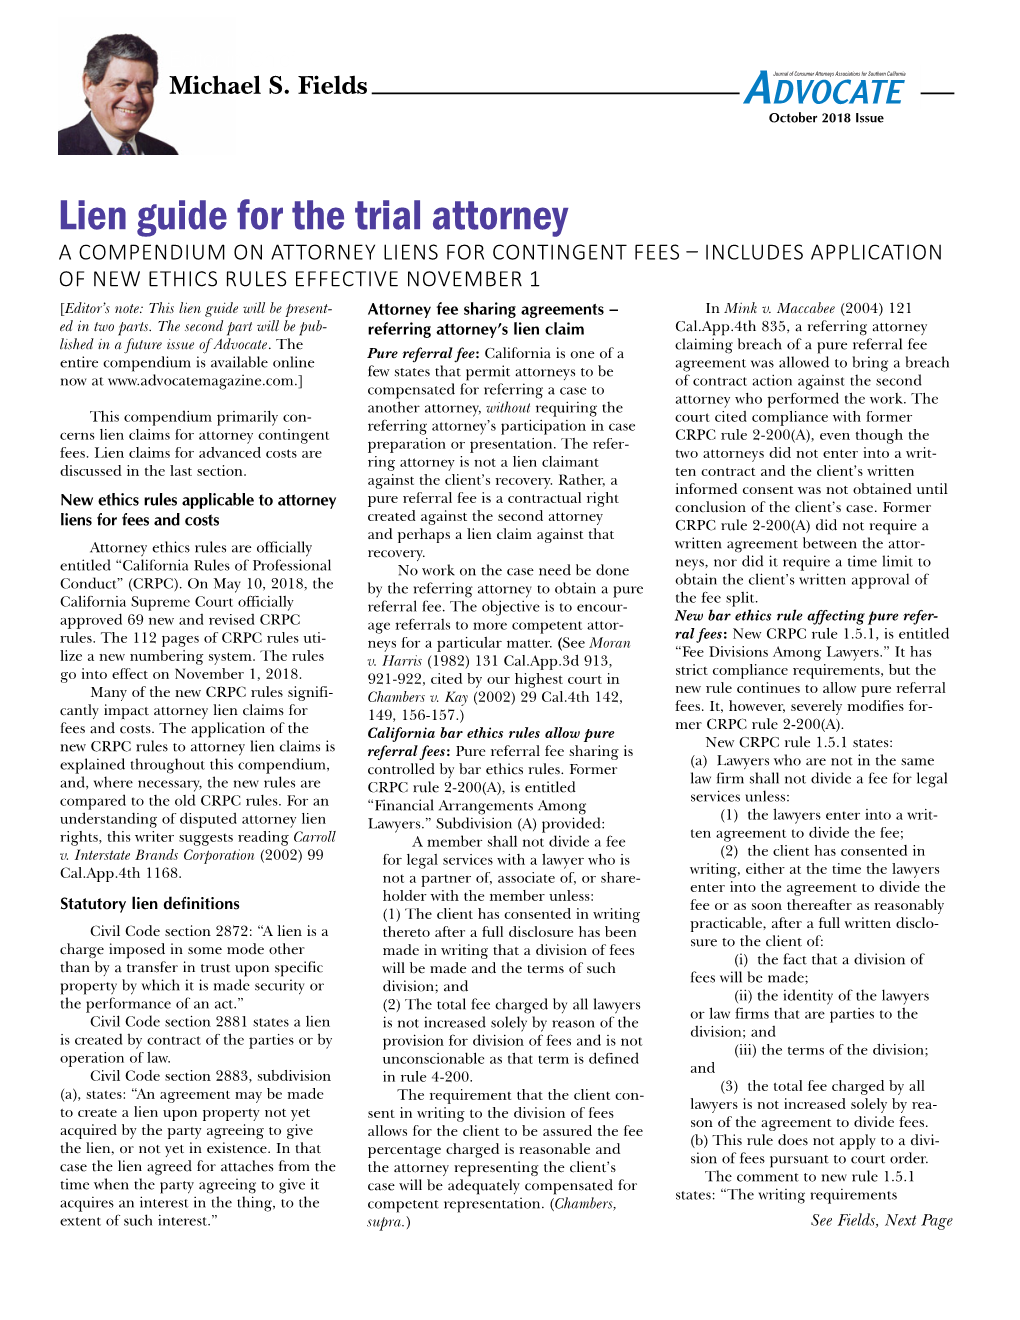 Lien Guide for the Trial Attorney a COMPENDIUM on ATTORNEY LIENS for CONTINGENT FEES – INCLUDES APPLICATION of NEW ETHICS RULES EFFECTIVE NOVEMBER 1